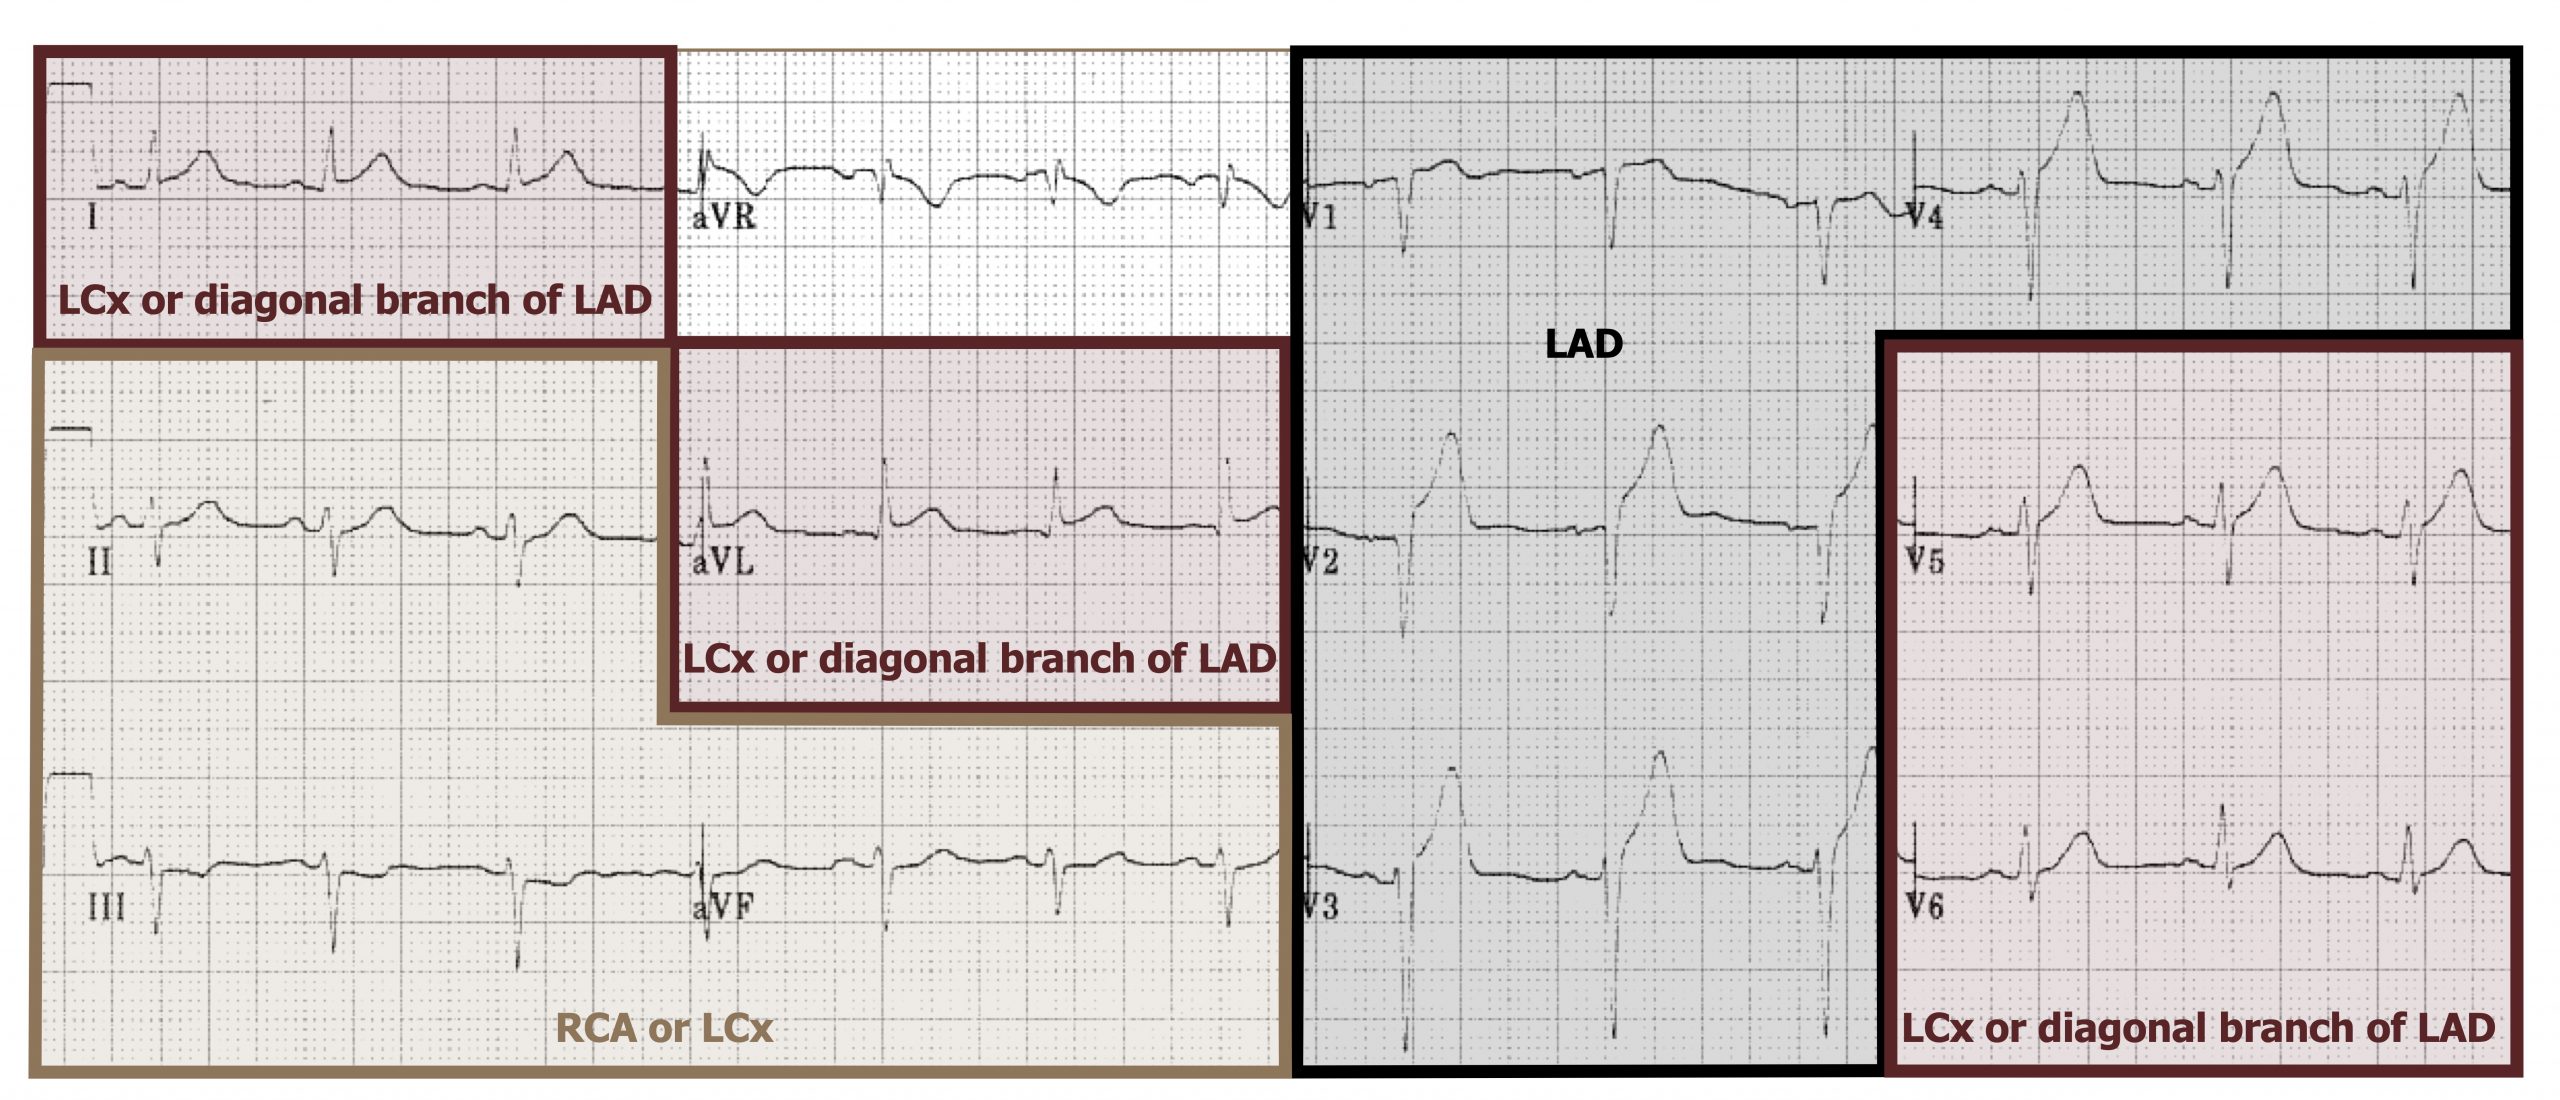 I: LCx or diagonal branch of LAD. II, III, and aVF: RCA or LCx. aVL: LCx or diagonal branch of LAD. V1, V2, V3, V4: LAD. V5, V6: LCx or diagonal branch of LAD.